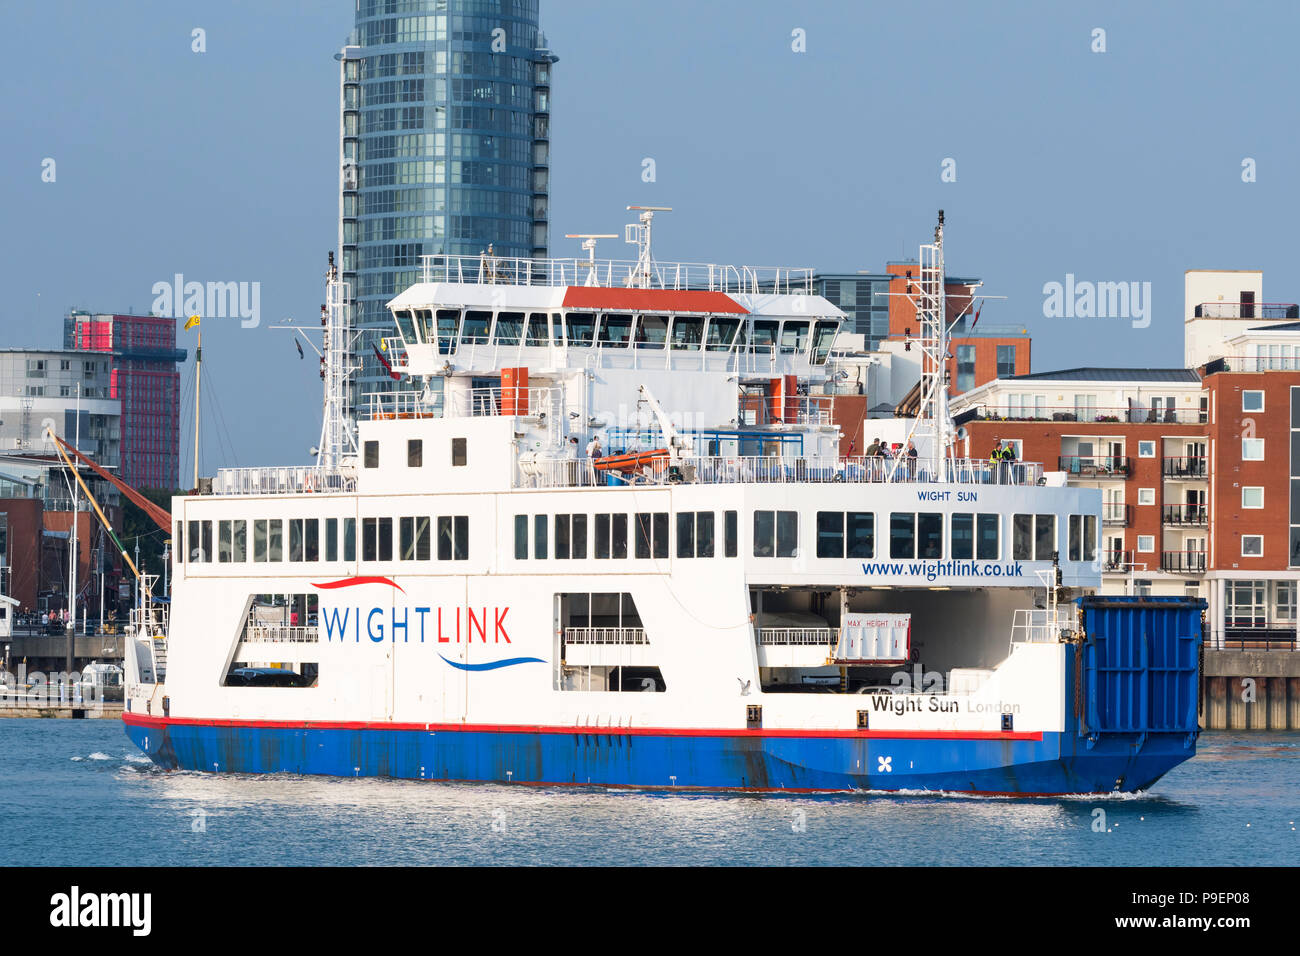 Wight Sun, a Wightlink car and passenger ferry in Summer in Portsmouth Harbour, Portsmouth, Hampshire, England, UK. Stock Photo